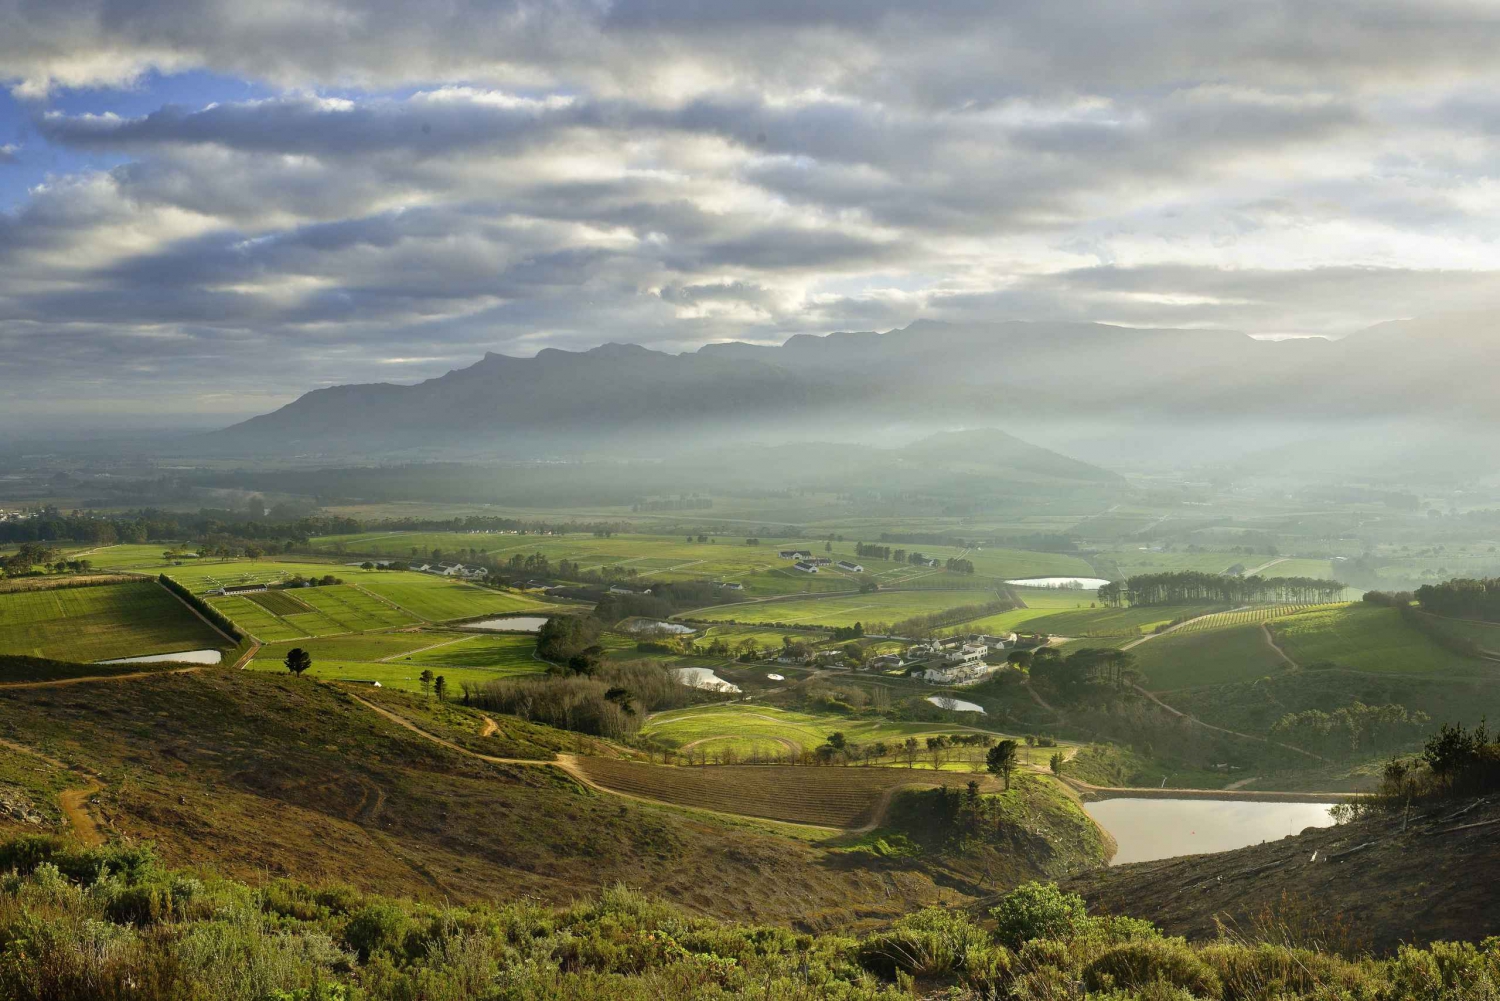 Capetown Winelands Half Day Tour with Local Guide